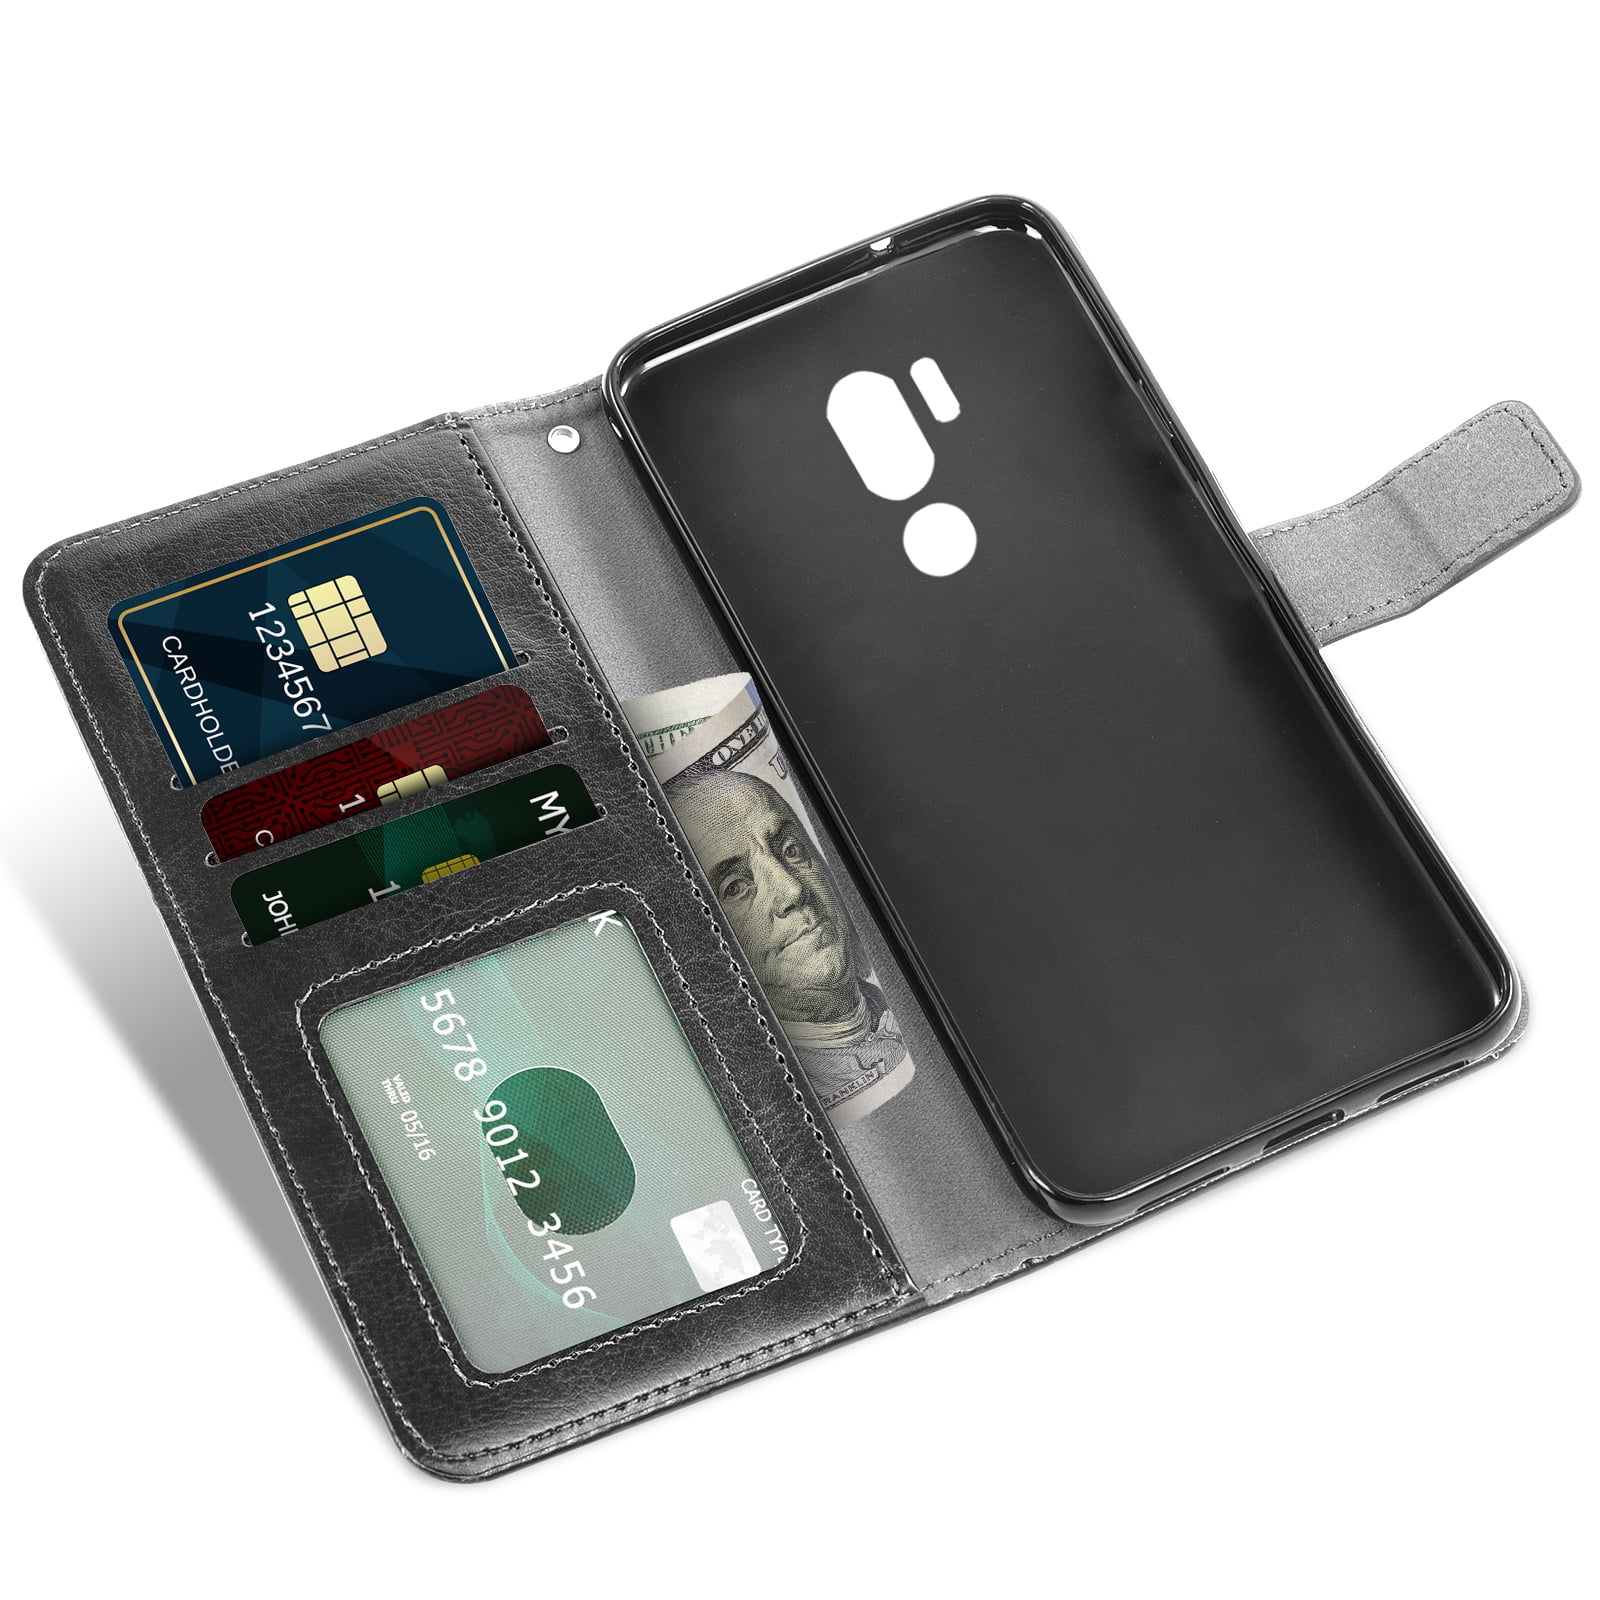 Phone Case for LG G7 One ThinQ with Tempered Glass Screen Protector Cover and Card Holder Slot Wallet Kickstand Slim Cell Accessories LGG7 G 7 Fit LG7 Thin Q G7thinq G7one 7G 1 LG7one LGG7ThinQ Black